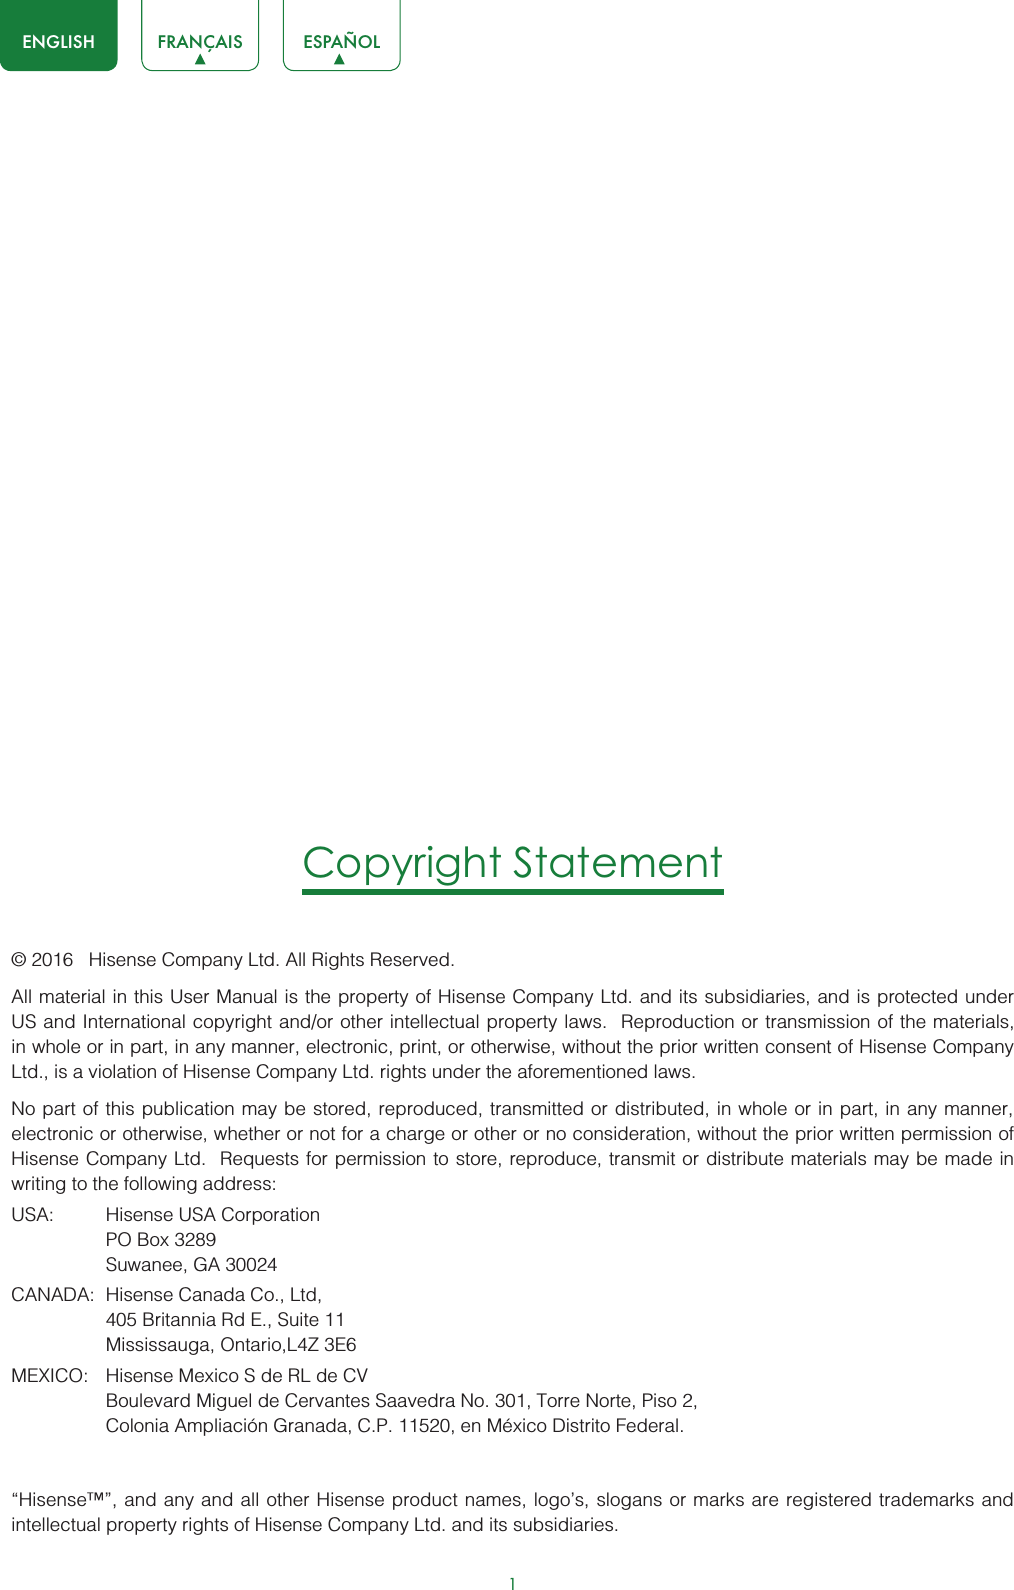 1ENGLISH FRANÇAIS ESPAÑOLCopyright Statement© 2016   Hisense Company Ltd. All Rights Reserved.All material in this User Manual is the property of Hisense Company Ltd. and its subsidiaries, and is protected under US and International copyright and/or other intellectual property laws.  Reproduction or transmission of the materials, in whole or in part, in any manner, electronic, print, or otherwise, without the prior written consent of Hisense Company Ltd., is a violation of Hisense Company Ltd. rights under the aforementioned laws. No part of this publication may be stored, reproduced, transmitted or distributed, in whole or in part, in any manner, electronic or otherwise, whether or not for a charge or other or no consideration, without the prior written permission of Hisense Company Ltd.  Requests for permission to store, reproduce, transmit or distribute materials may be made in writing to the following address:USA: Hisense USA CorporationPO Box 3289Suwanee, GA 30024CANADA: Hisense Canada Co., Ltd,405 Britannia Rd E., Suite 11Mississauga, Ontario,L4Z 3E6MEXICO: Hisense Mexico S de RL de CVBoulevard Miguel de Cervantes Saavedra No. 301, Torre Norte, Piso 2,Colonia Ampliación Granada, C.P. 11520, en México Distrito Federal.“Hisense™”, and any and all other Hisense product names, logo’s, slogans or marks are registered trademarks and intellectual property rights of Hisense Company Ltd. and its subsidiaries. 